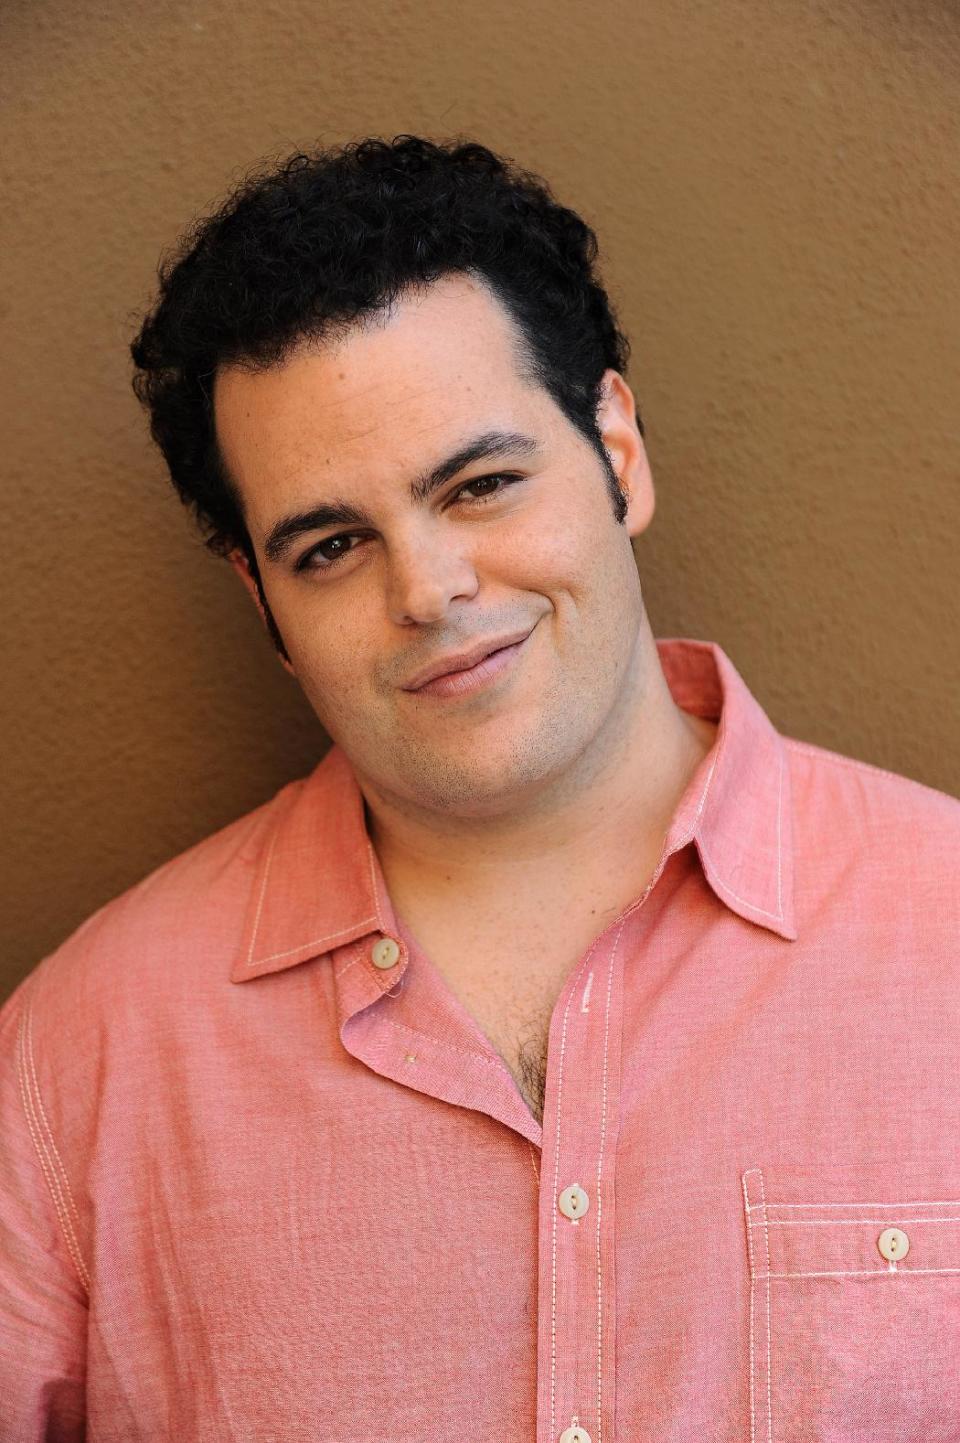 n this Monday, Sept. 16, 2013 photo, Josh Gad poses for a portrait at the Four Seasons Hotel, in Los Angeles. Gad has a spate of acting and writing projects in the works, including an upcoming TV show with Billy Crystal and starring role in a Sam Kinison biopic, plus “Thanks for Sharing,” in theaters Friday, Sept. 20, 2013. (Photo by Jordan Strauss/Invision/AP, File)